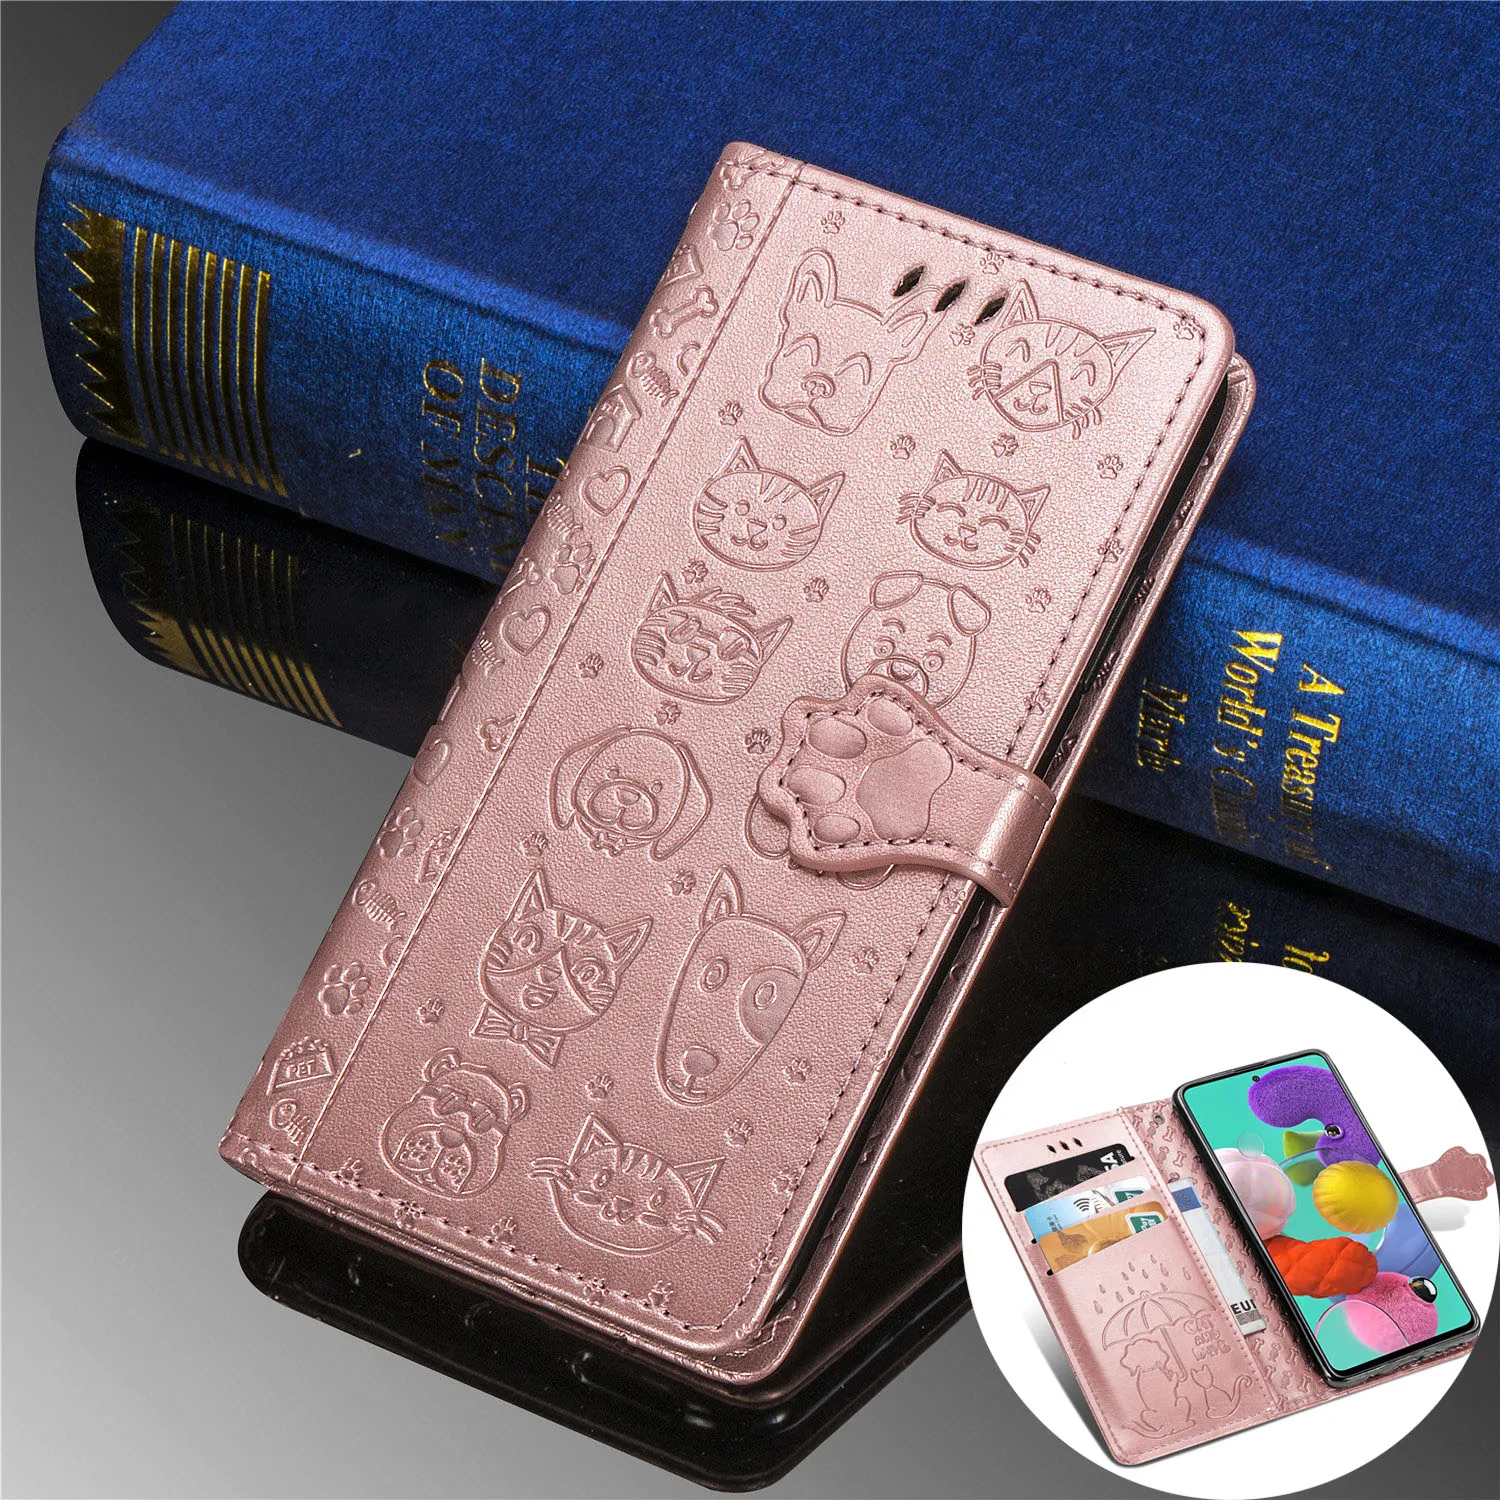 

Cartoon Leather Wallet Case For Samsung Galaxy A M 01 11 21 21S 31 41 51 71 20S 30S 50S S10 S20 Plus A51 M21 M31 A21S Flip Cover